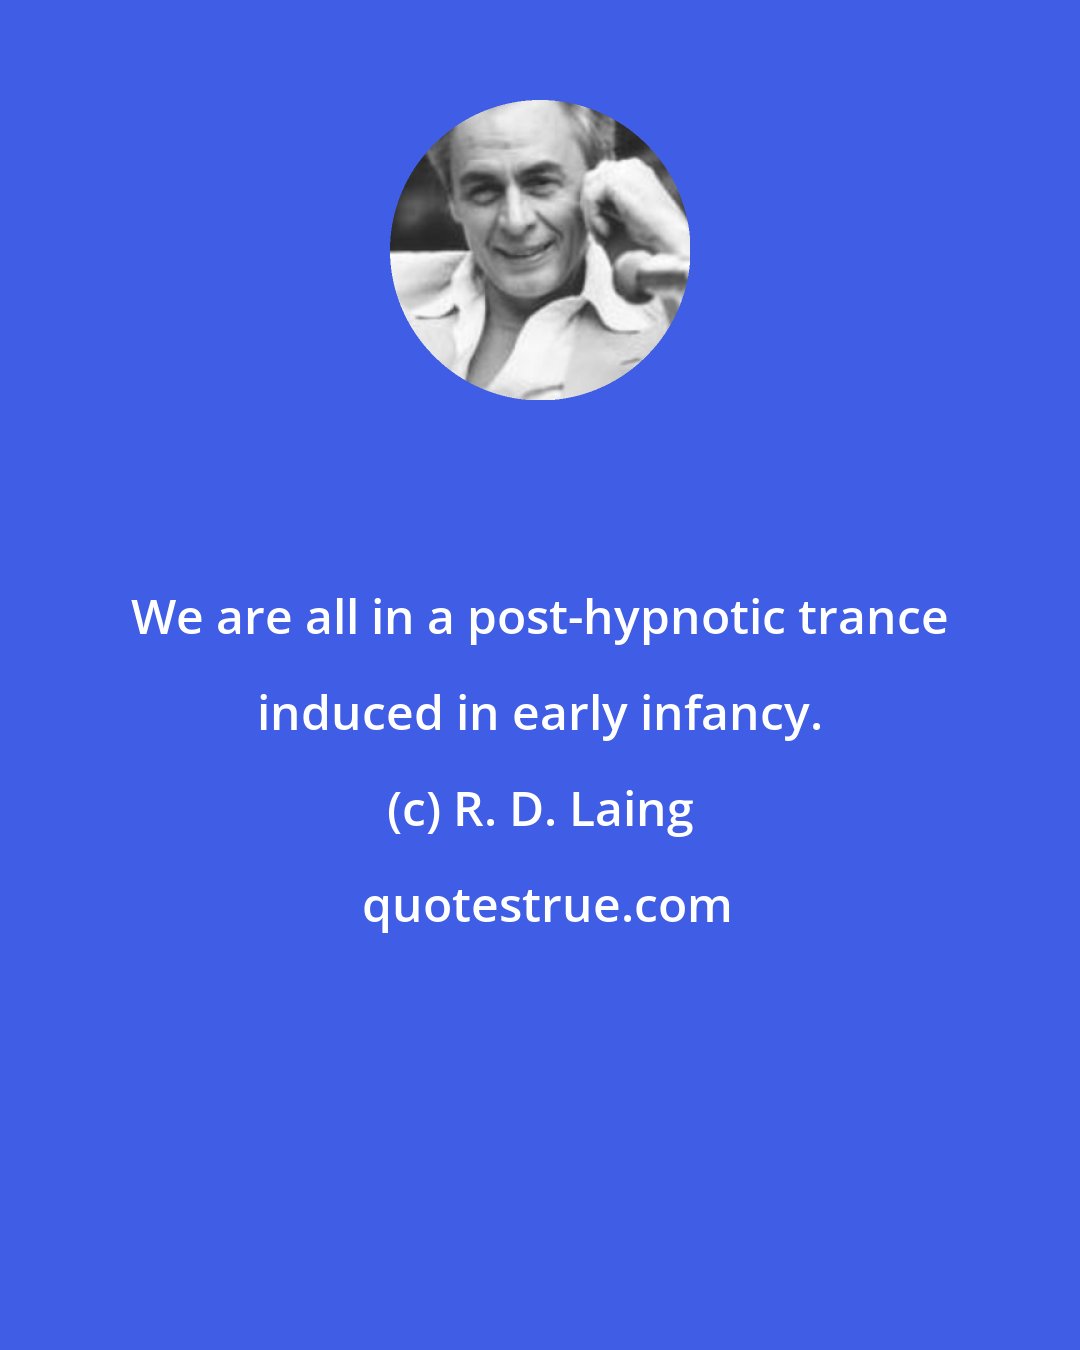 R. D. Laing: We are all in a post-hypnotic trance induced in early infancy.